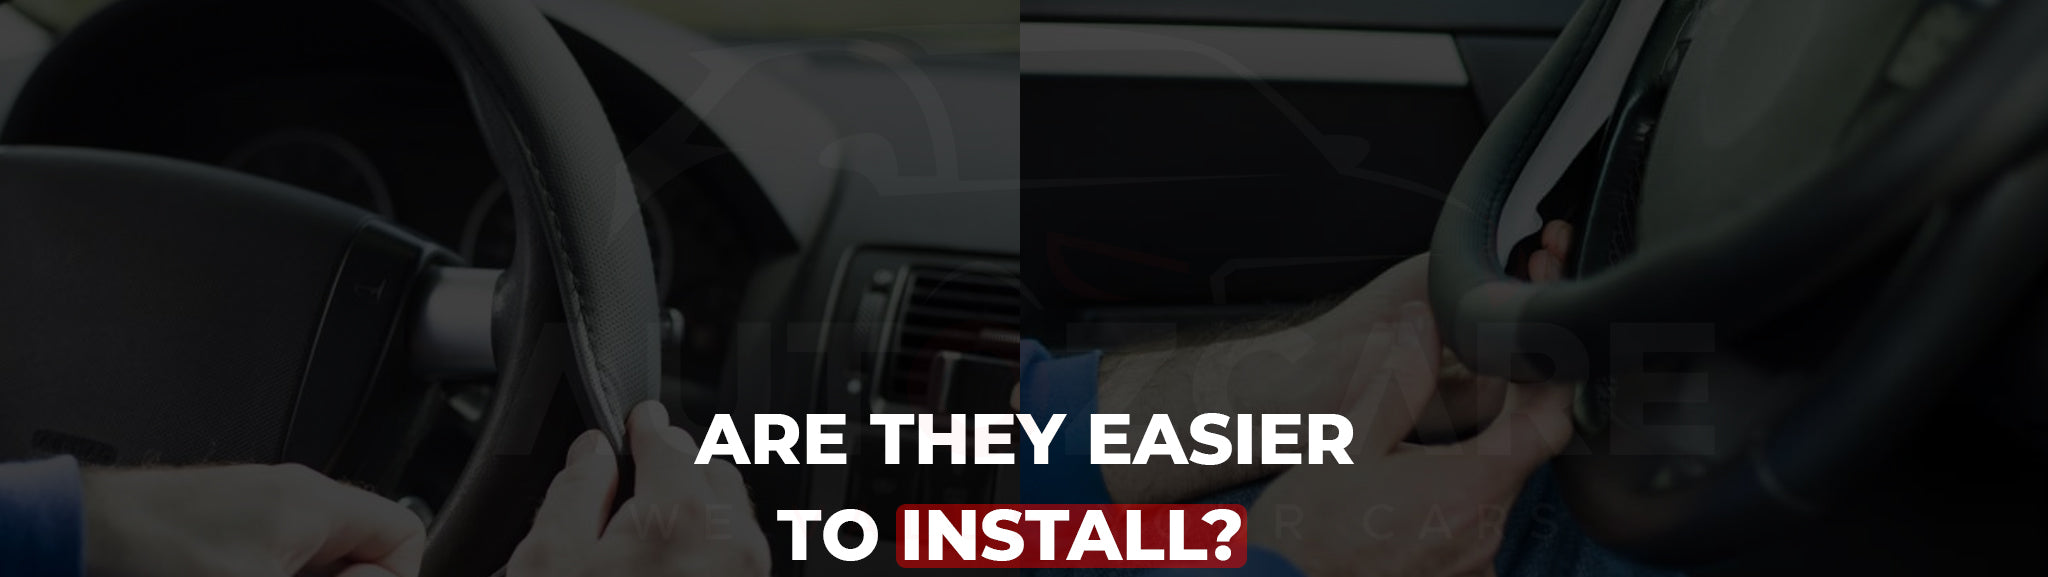 Are they easier to install?